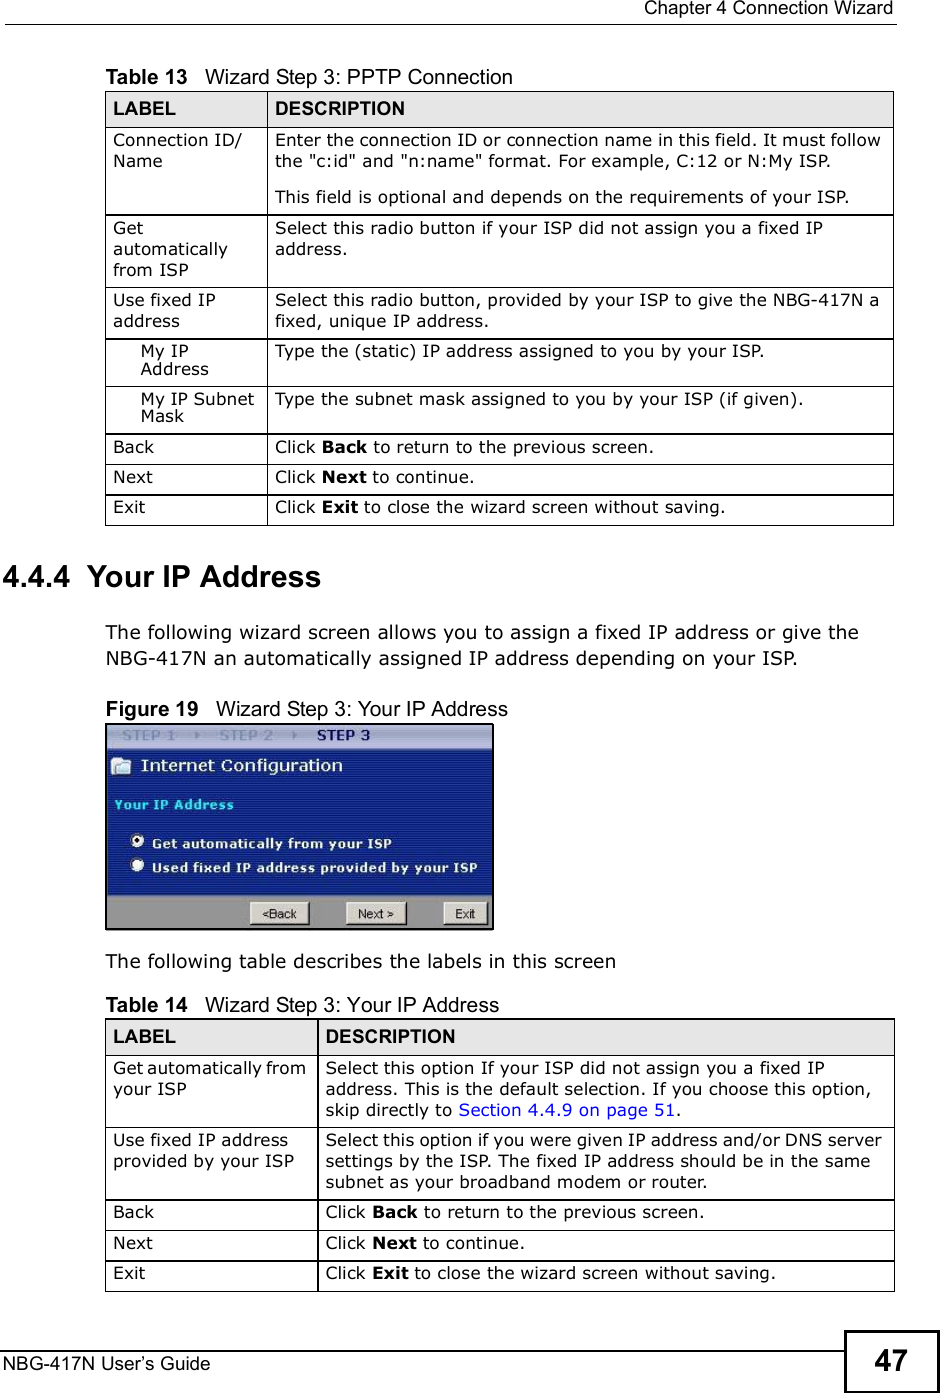  Chapter 4Connection WizardNBG-417N User s Guide 474.4.4  Your IP AddressThe following wizard screen allows you to assign a fixed IP address or give the NBG-417N an automatically assigned IP address depending on your ISP.Figure 19   Wizard Step 3: Your IP AddressThe following table describes the labels in this screenConnection ID/NameEnter the connection ID or connection name in this field. It must follow the &quot;c:id&quot; and &quot;n:name&quot; format. For example, C:12 or N:My ISP.This field is optional and depends on the requirements of your ISP.Get automatically from ISPSelect this radio button if your ISP did not assign you a fixed IP address.Use fixed IP addressSelect this radio button, provided by your ISP to give the NBG-417N a fixed, unique IP address.My IP AddressType the (static) IP address assigned to you by your ISP.My IP Subnet MaskType the subnet mask assigned to you by your ISP (if given).Back Click Back to return to the previous screen.Next Click Next to continue. Exit Click Exit to close the wizard screen without saving.Table 13   Wizard Step 3: PPTP ConnectionLABEL DESCRIPTIONTable 14   Wizard Step 3: Your IP AddressLABEL DESCRIPTIONGet automatically from your ISP Select this option If your ISP did not assign you a fixed IP address. This is the default selection. If you choose this option, skip directly to Section 4.4.9 on page 51.Use fixed IP address provided by your ISPSelect this option if you were given IP address and/or DNS server settings by the ISP. The fixed IP address should be in the same subnet as your broadband modem or router. Back Click Back to return to the previous screen.Next Click Next to continue. Exit Click Exit to close the wizard screen without saving.